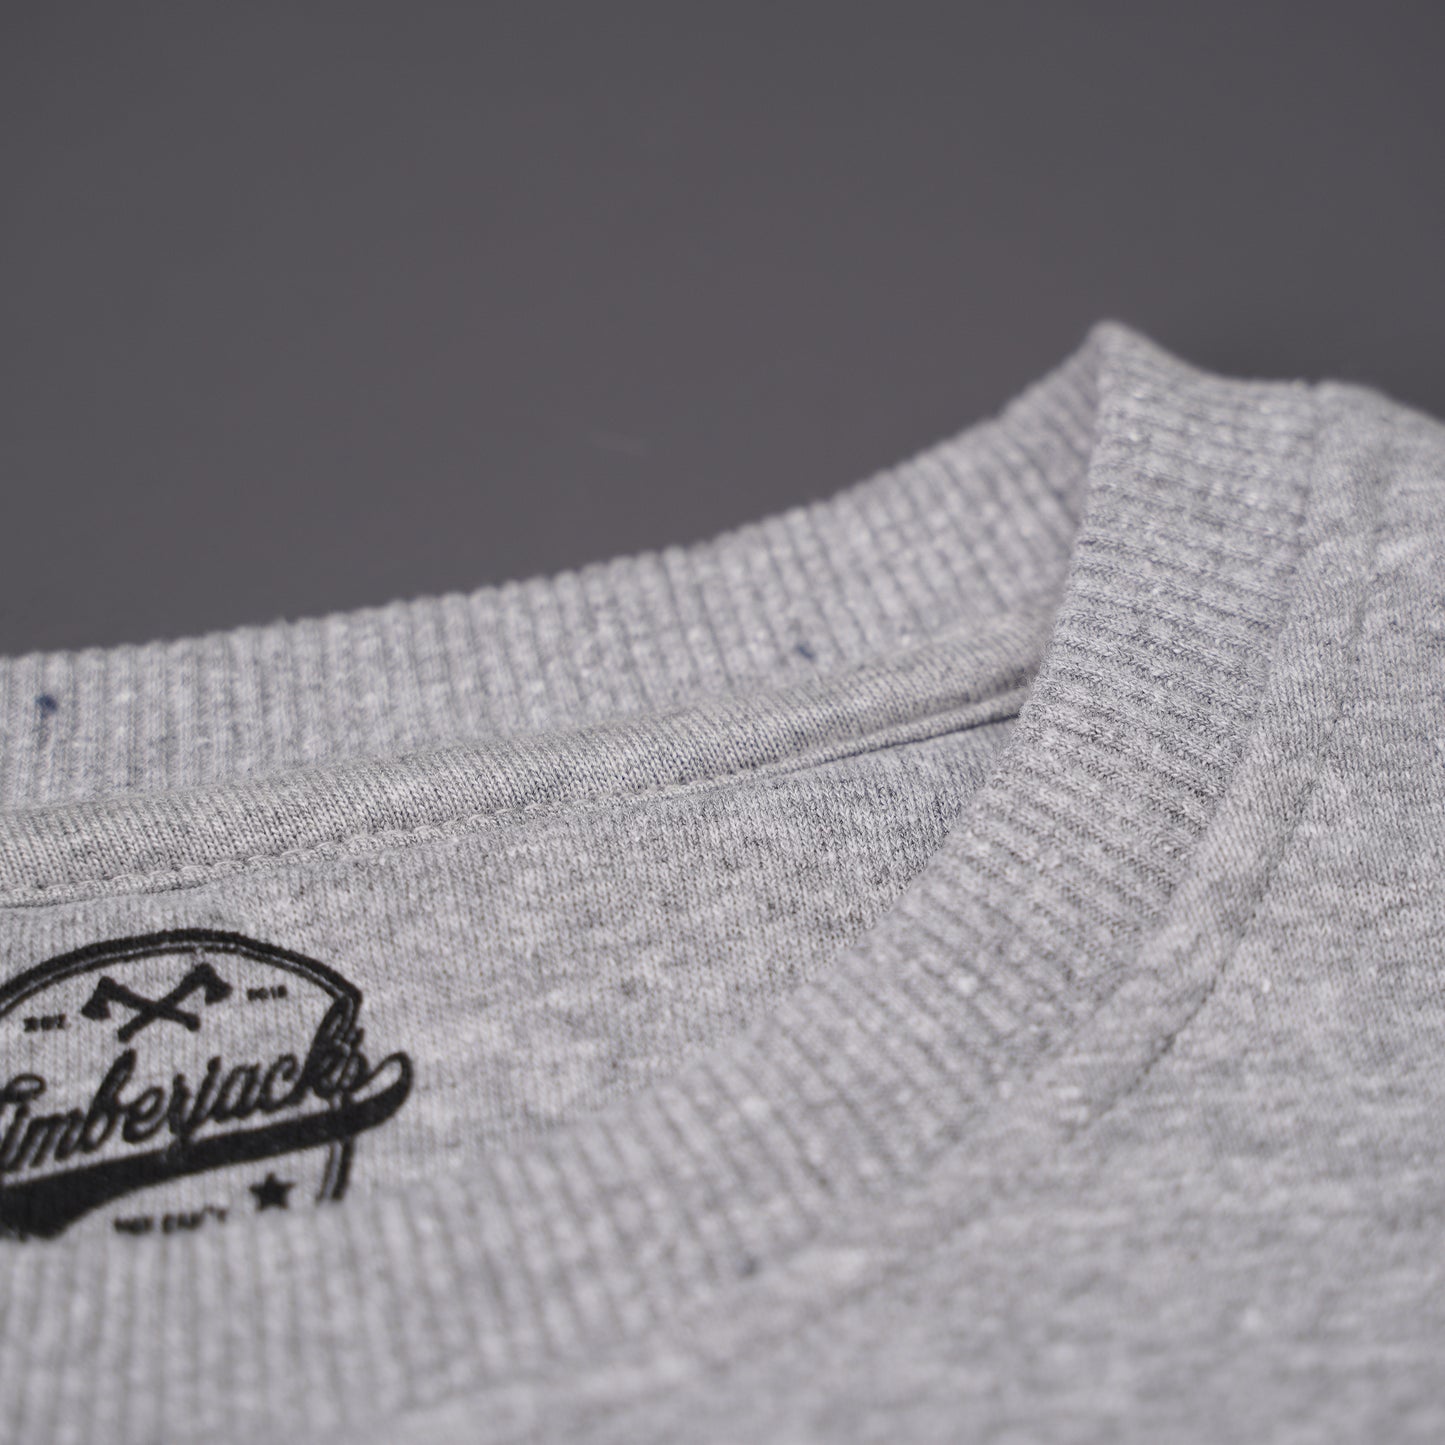 Sweatshirt Patch Ash Grey Recycled Cotton